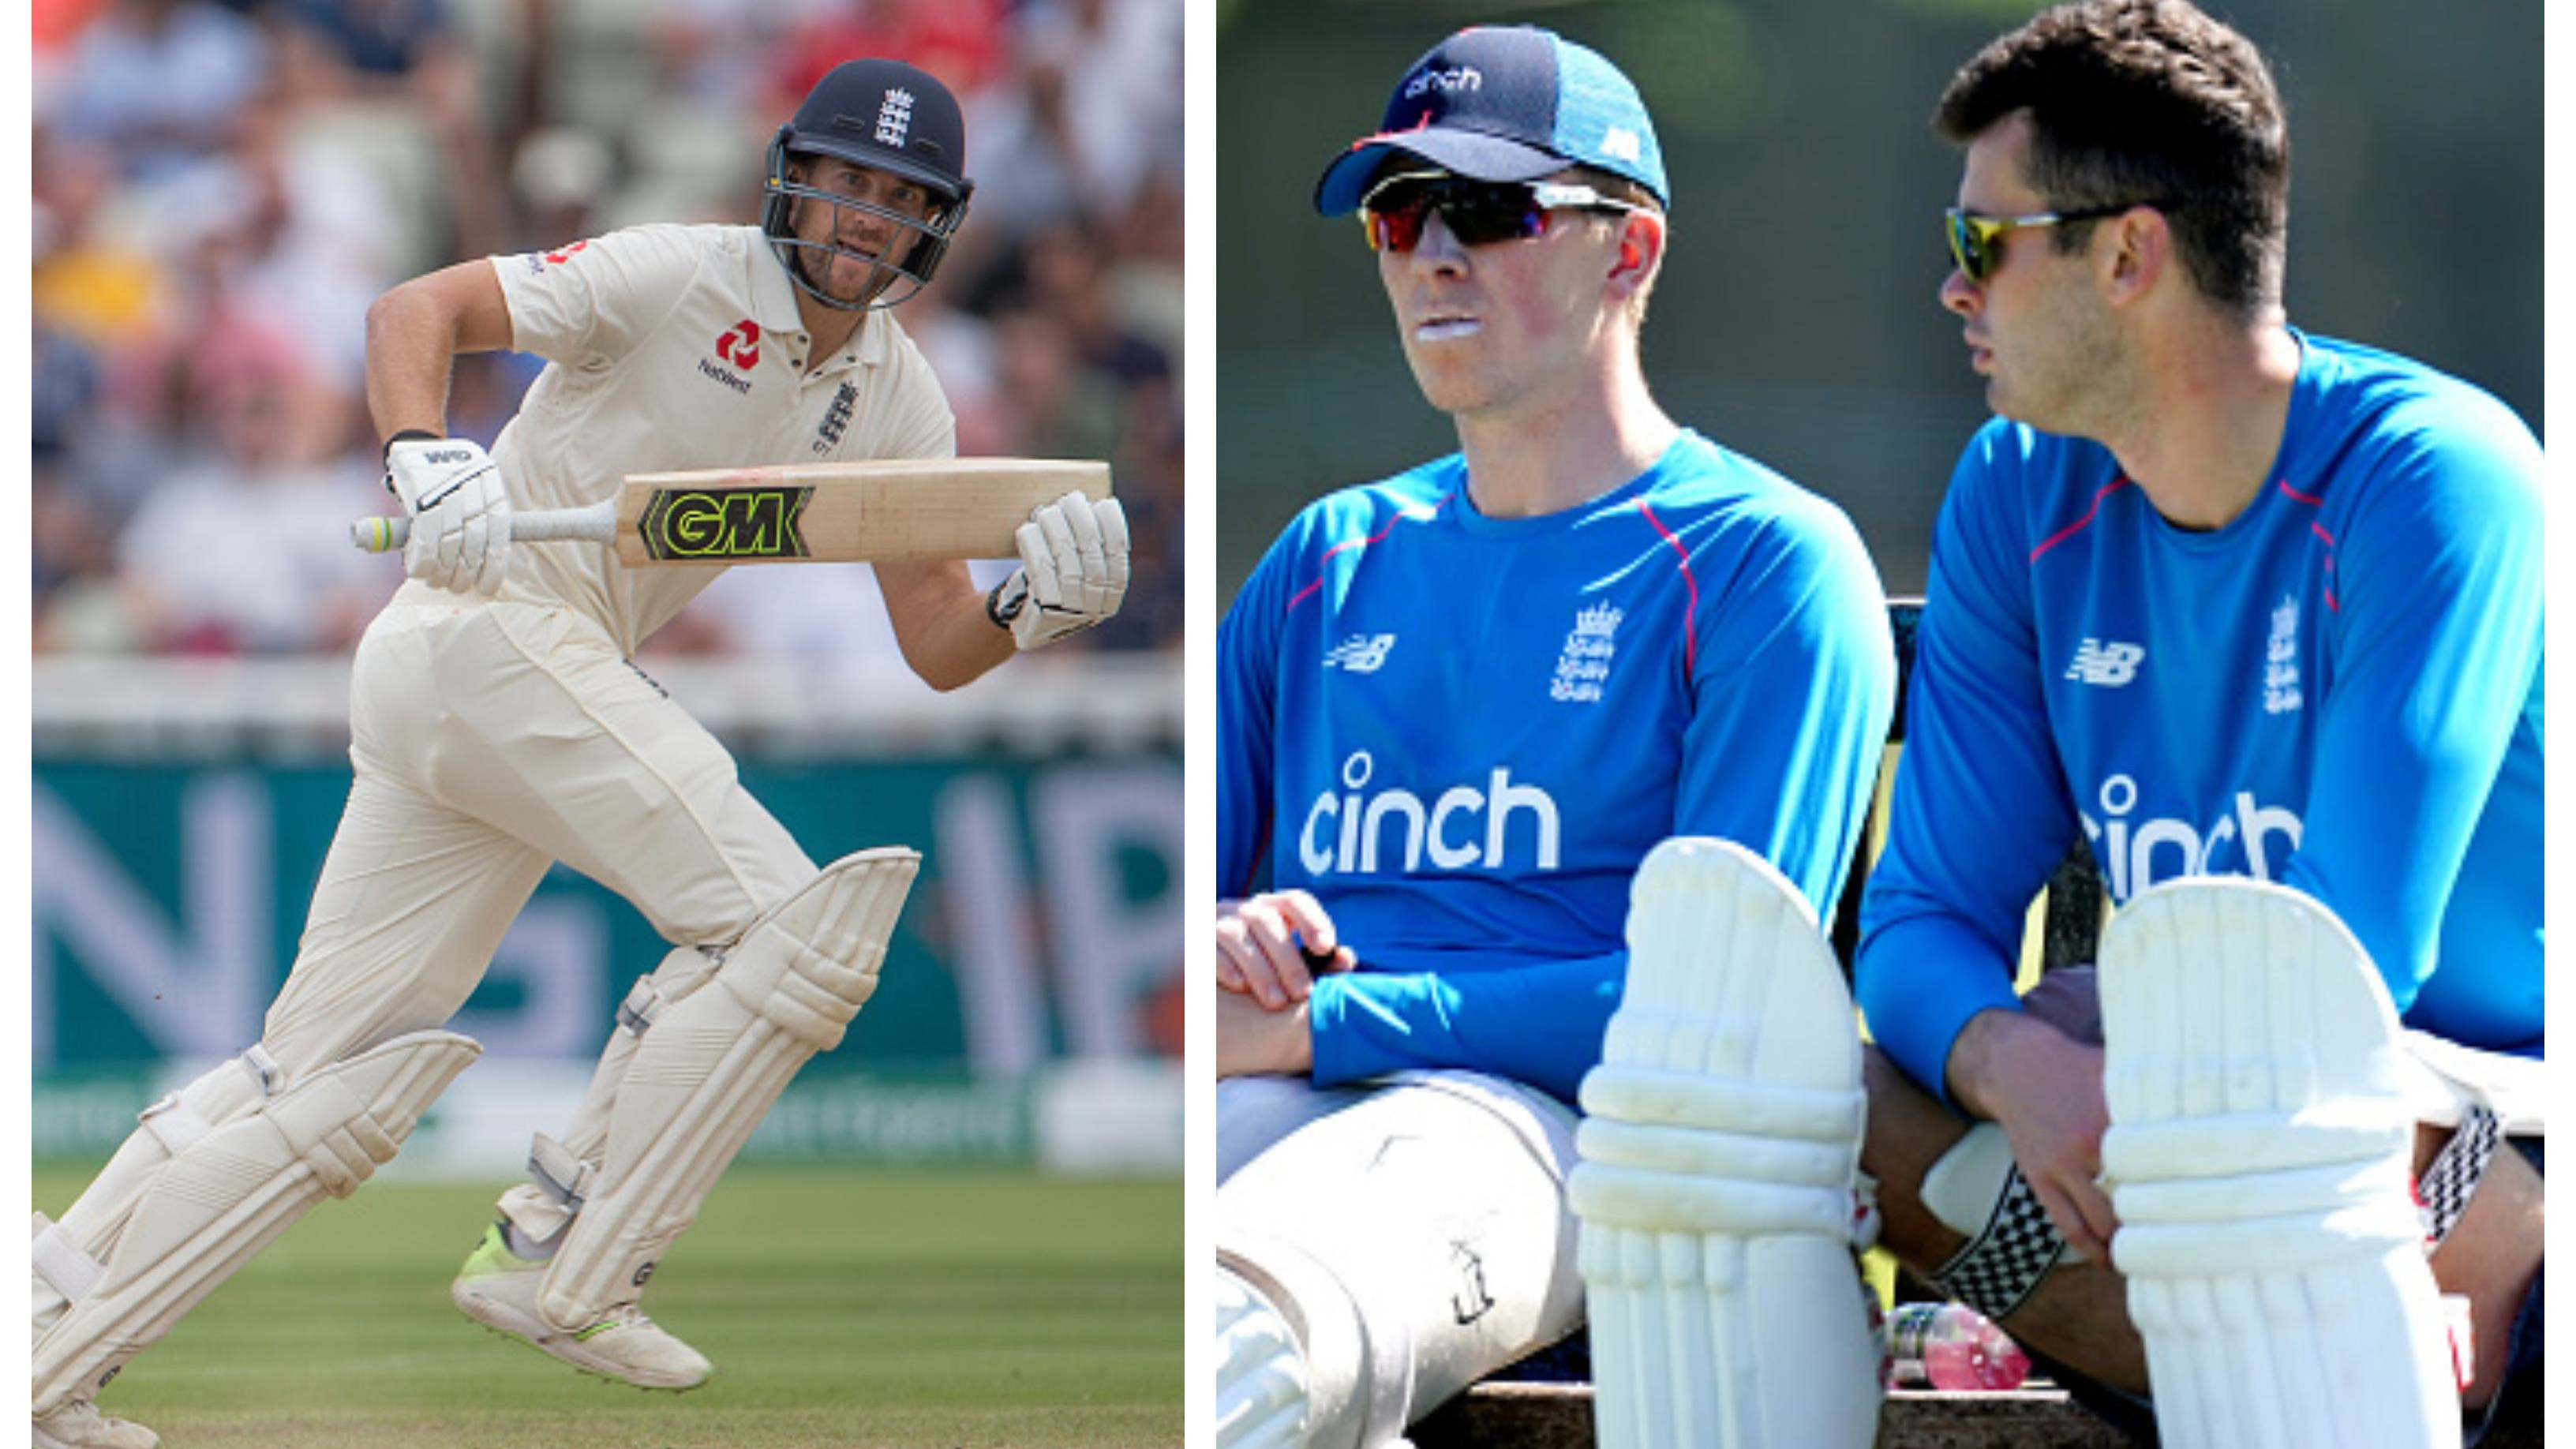 ENG v IND 2021: Dawid Malan added to England squad for third Test; Zak Crawley and Dom Sibley dropped